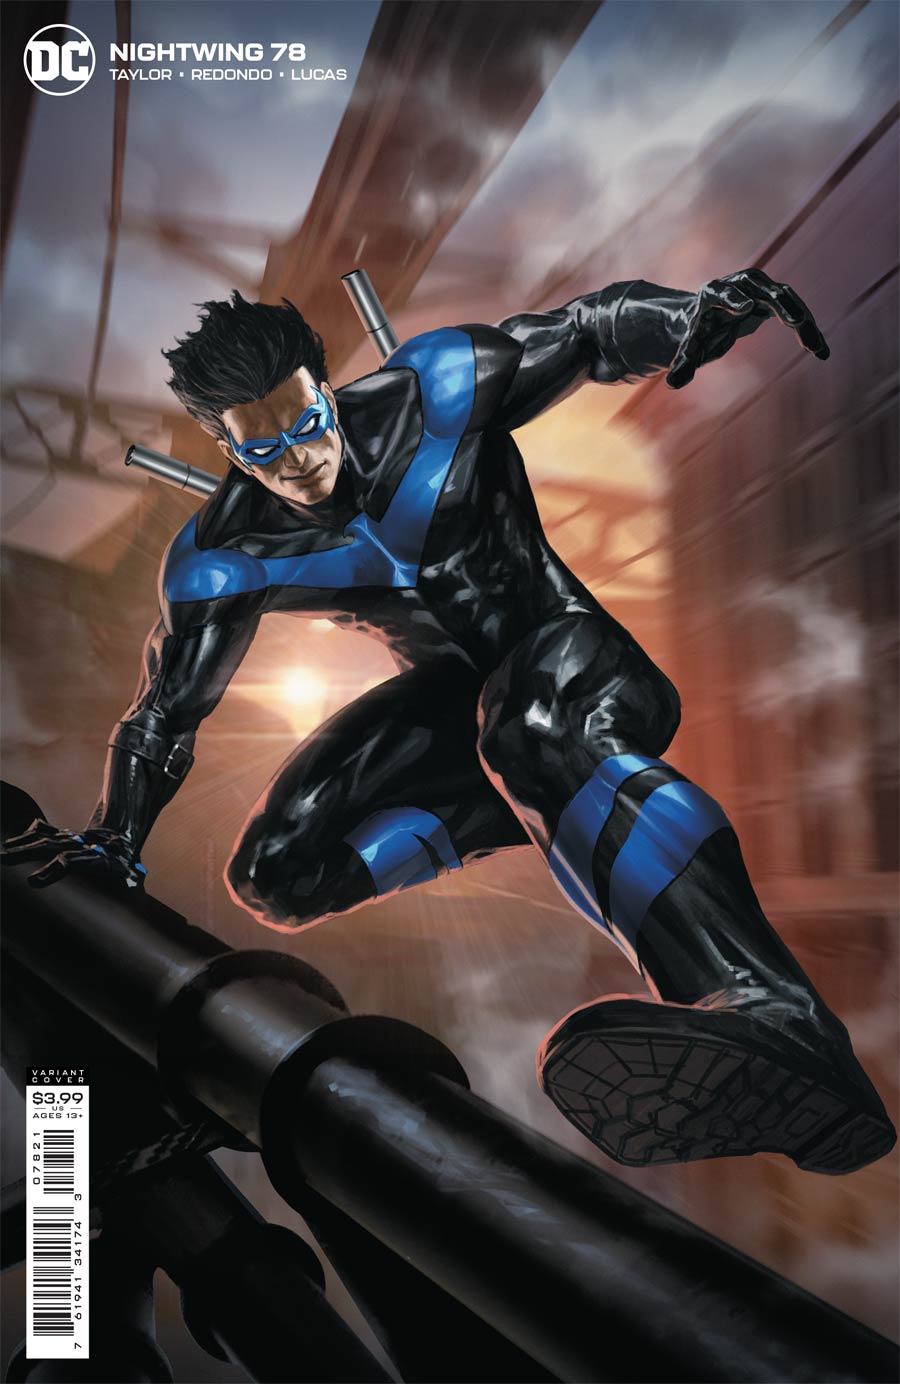 Nightwing Vol 4 #78 Cover B Variant Skan Cover